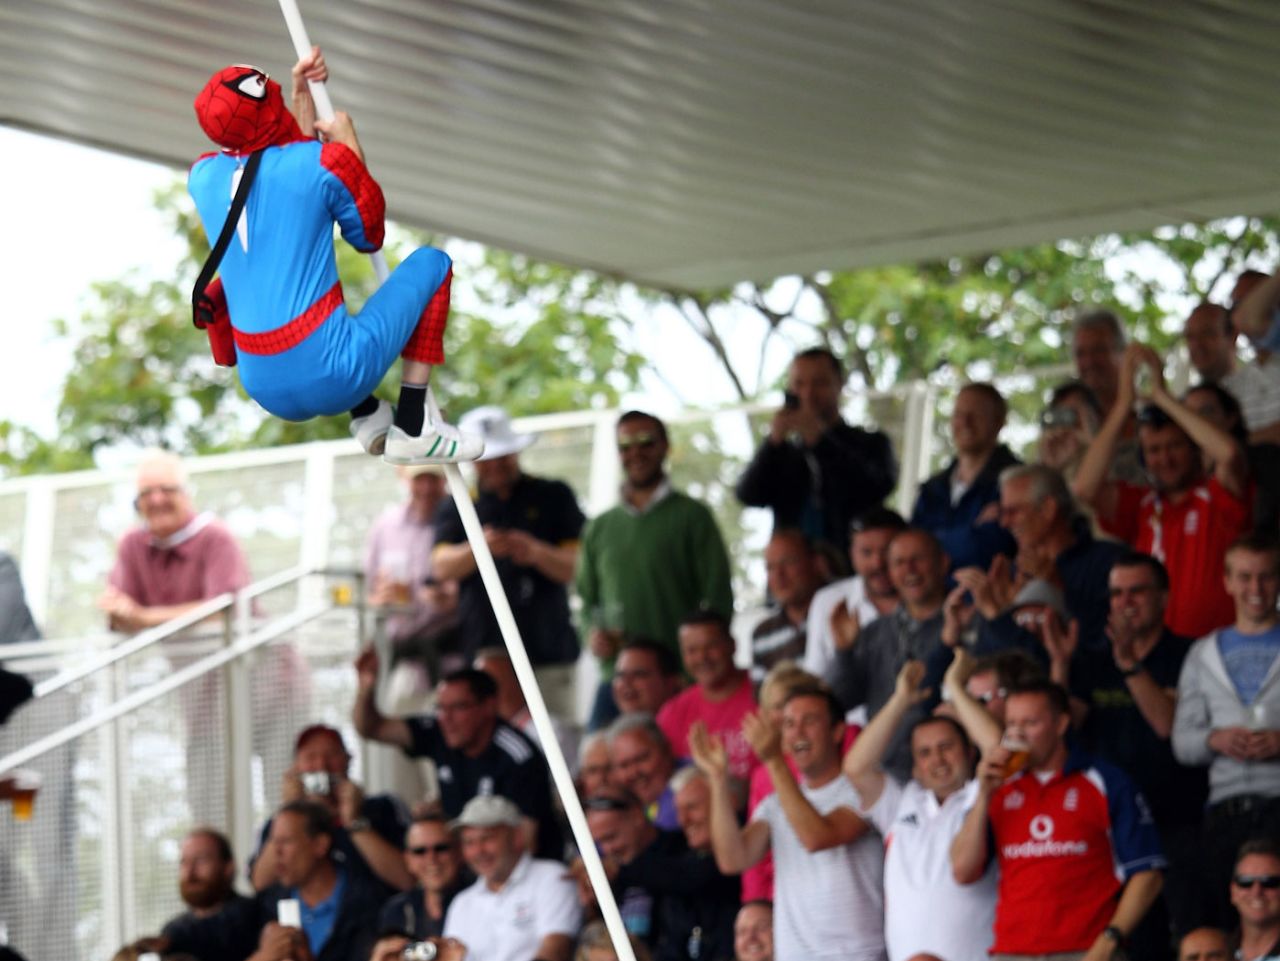 A fan dressed in a Spiderman costume climbs up a stand support, England v India, 3rd Test, Edgbaston, 3rd day, August 13, 2011